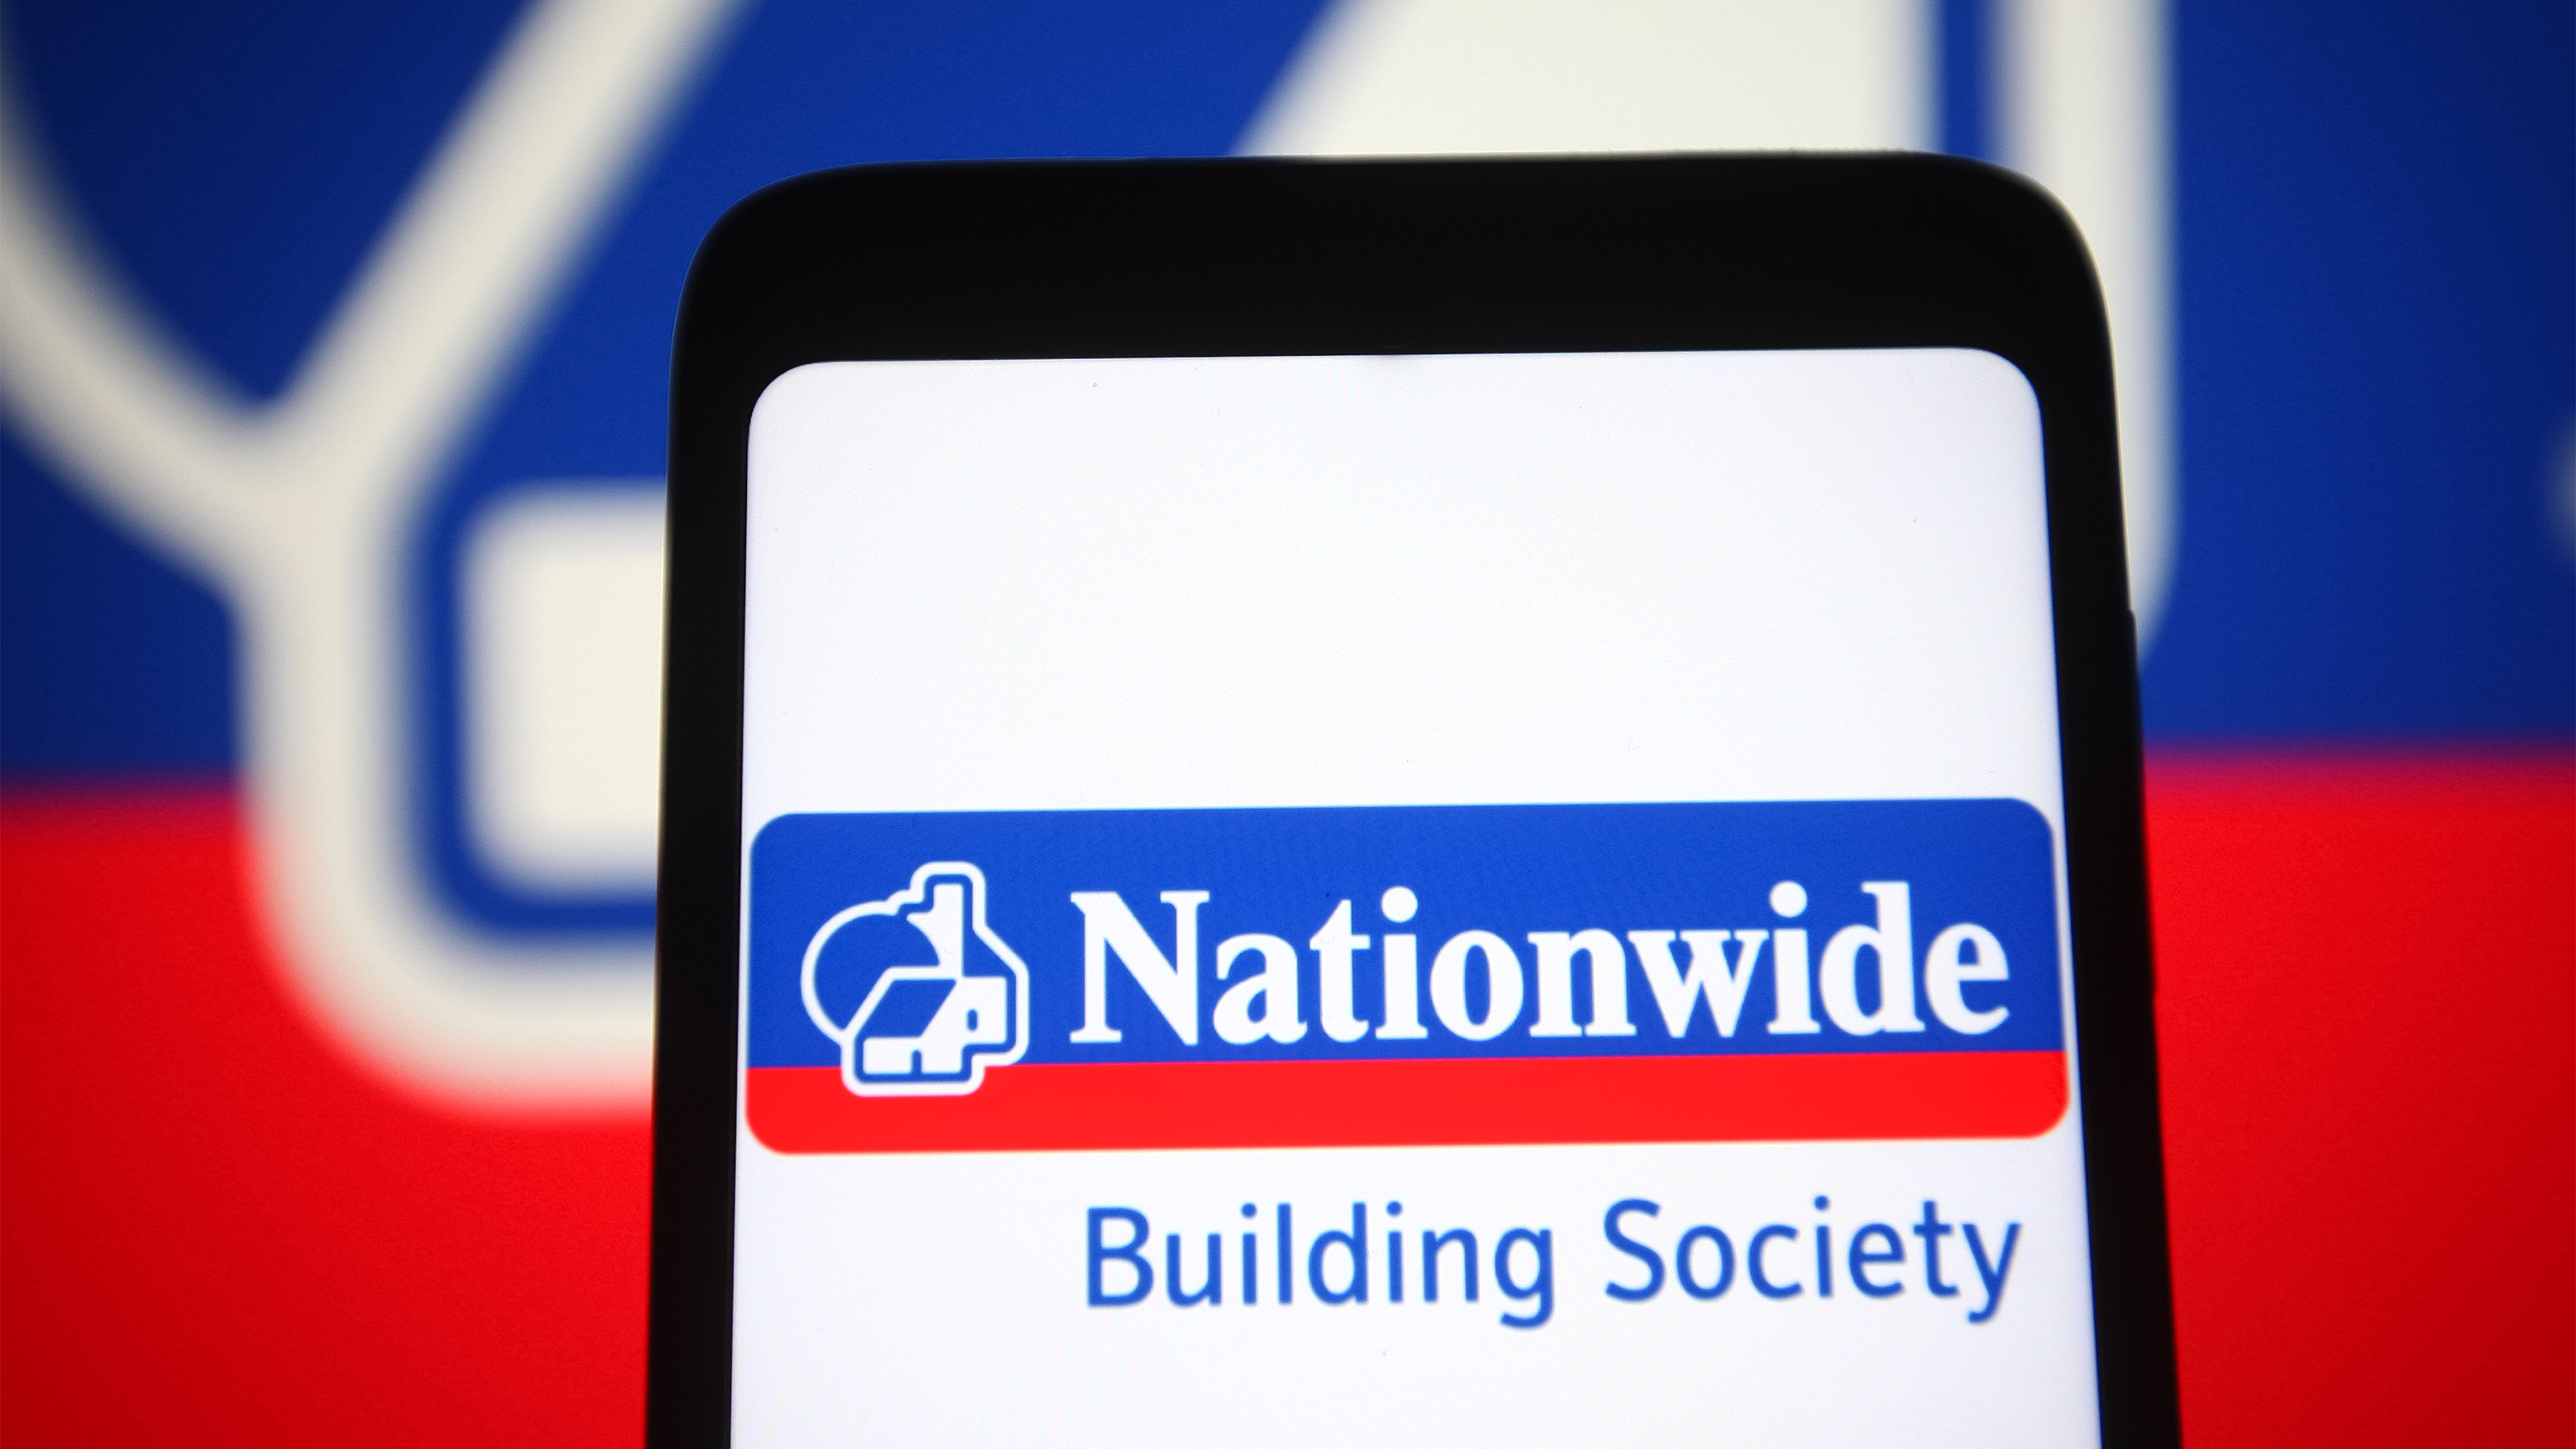 Nationwide Building Society logo on a smartphone screen.